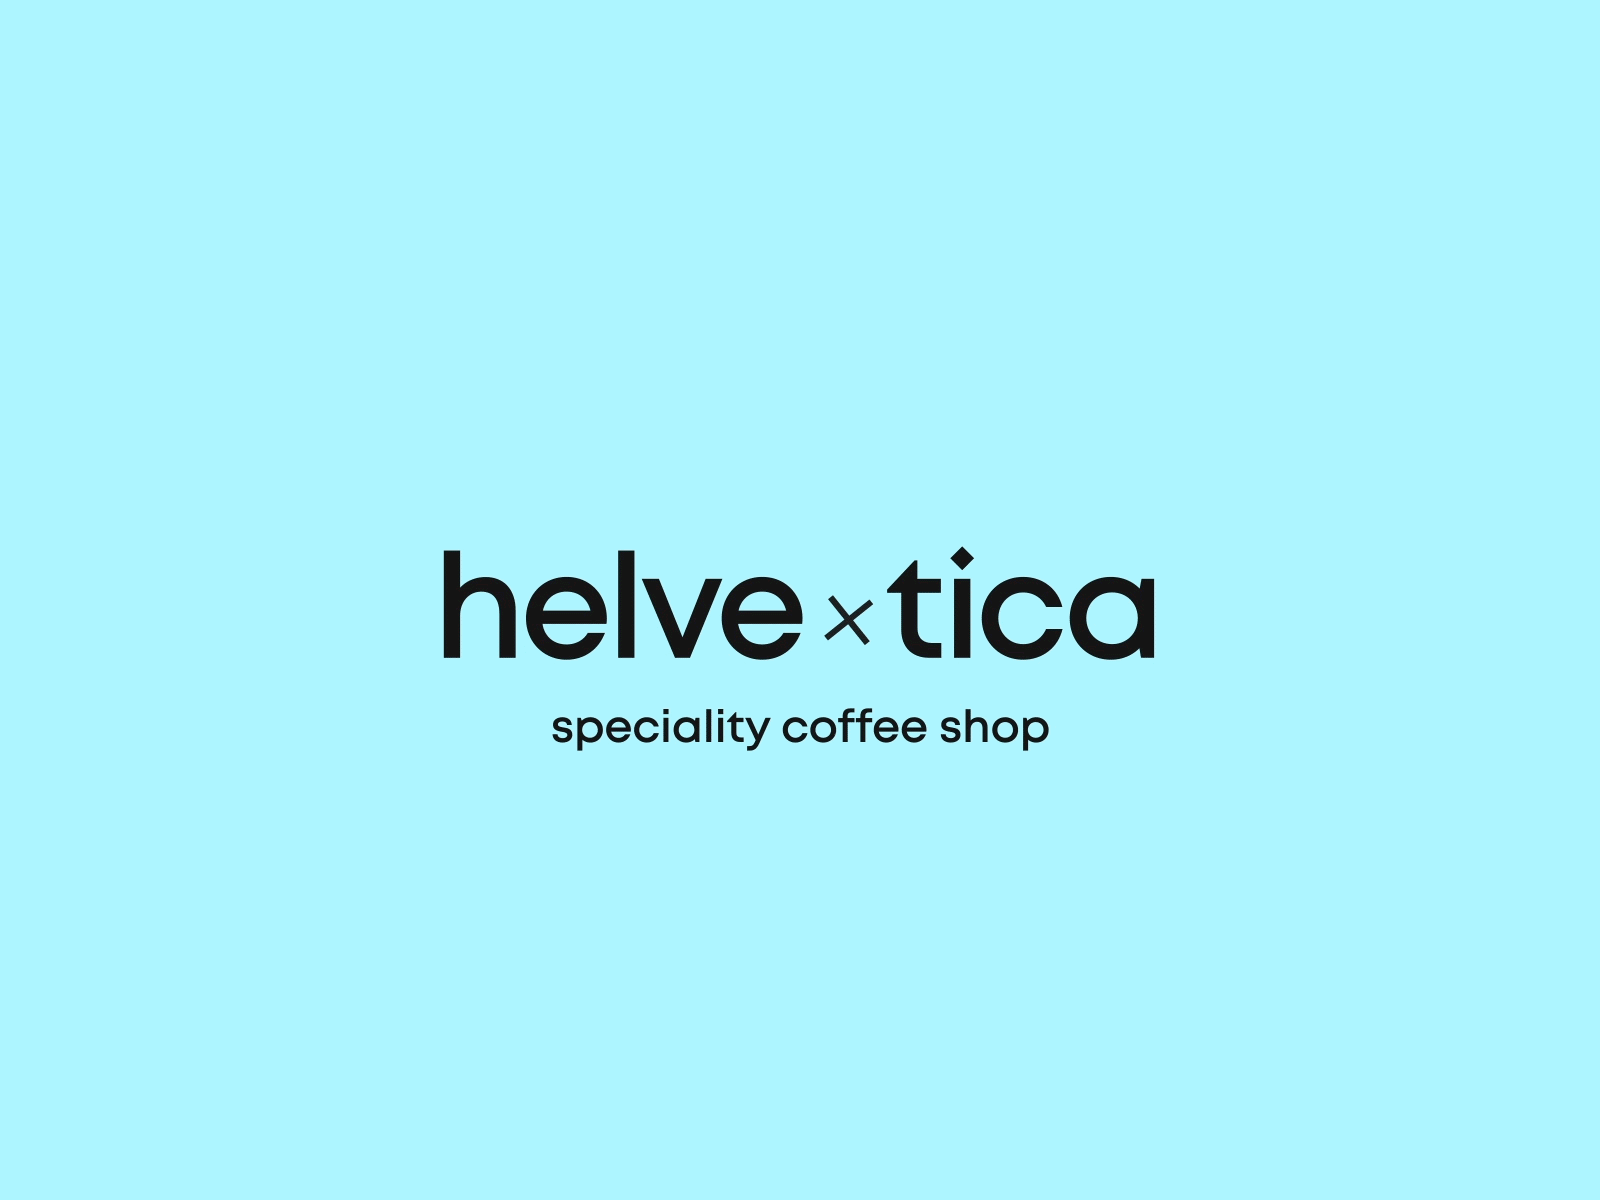 Helvetica Speciality Coffee Brand after effects aftereffects animated gif animation design animation illustration brand animation branding concept branding design coffe coffee shop coffeeshop french press helvetica illustraion logo siphon speciality coffee